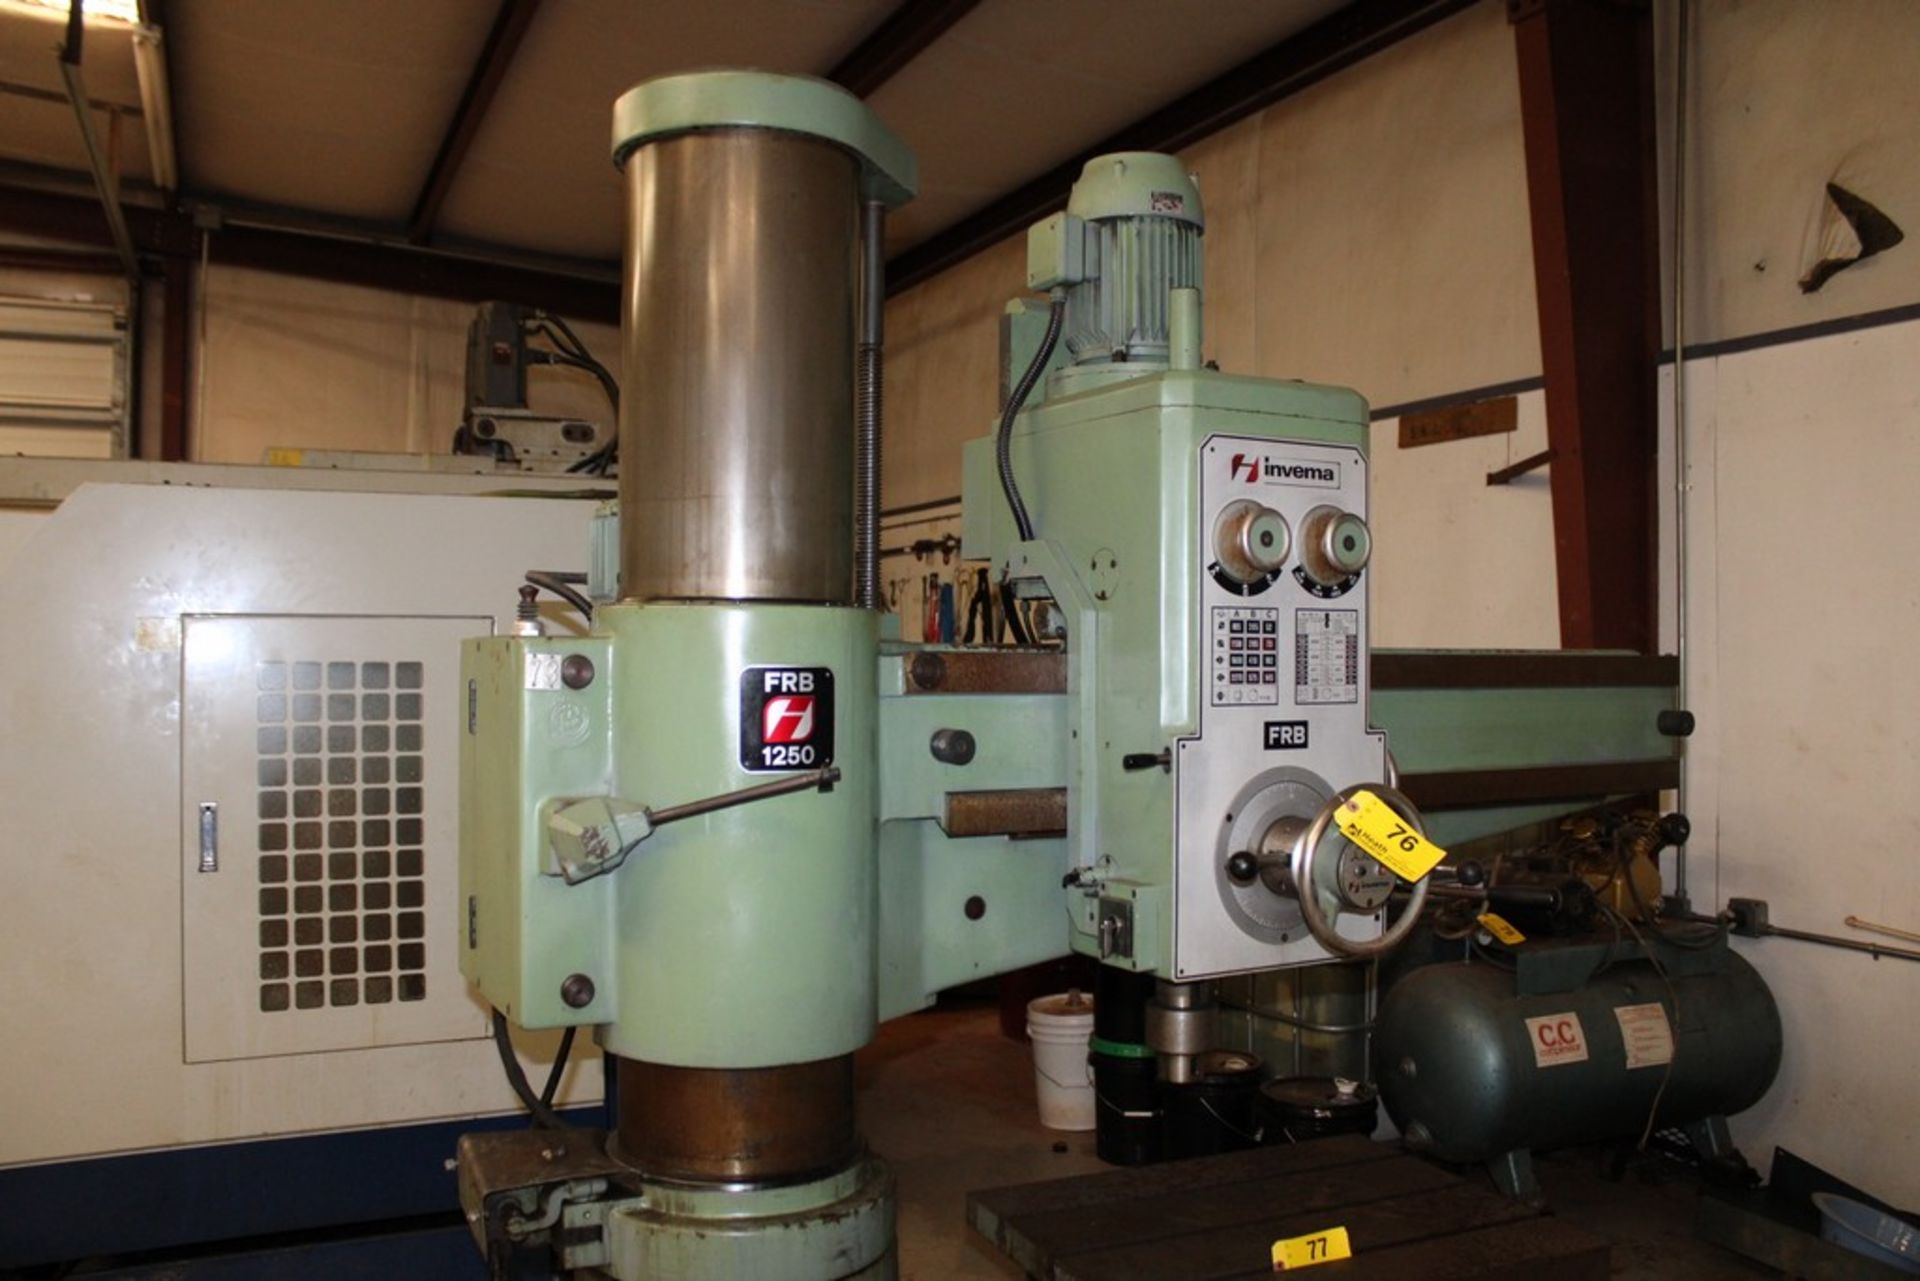 INVEMA MODEL FRB-1250 RADIAL ARM DRILL, 48" ARM, SPINDLE SPEEDS 52 TO 2270 RPM - Image 5 of 9